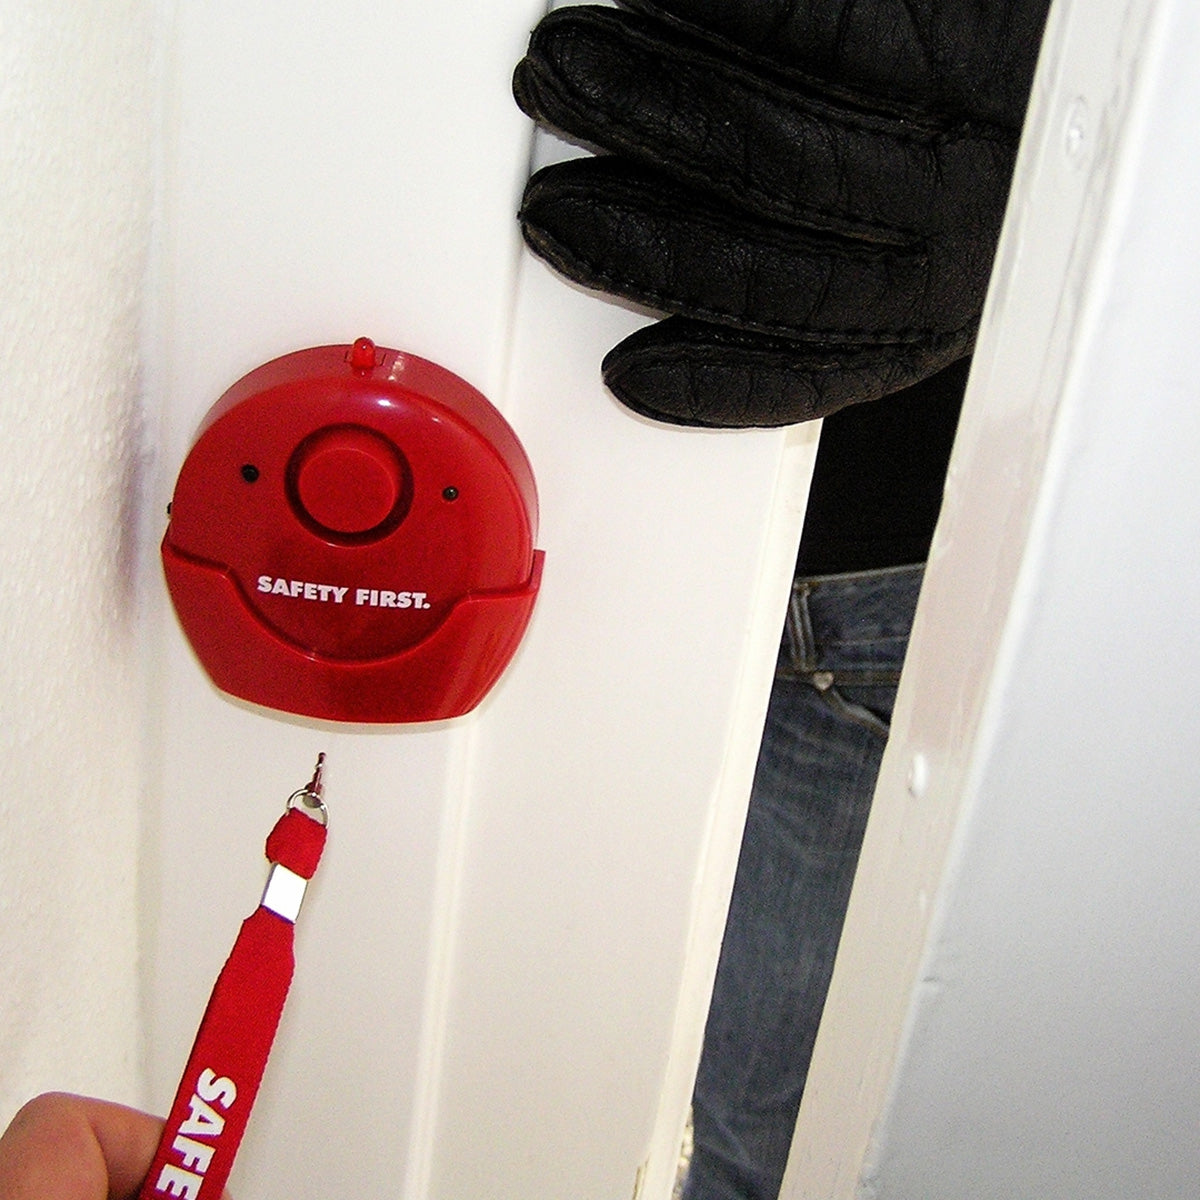 Emergency alarm with LED light to protect your home